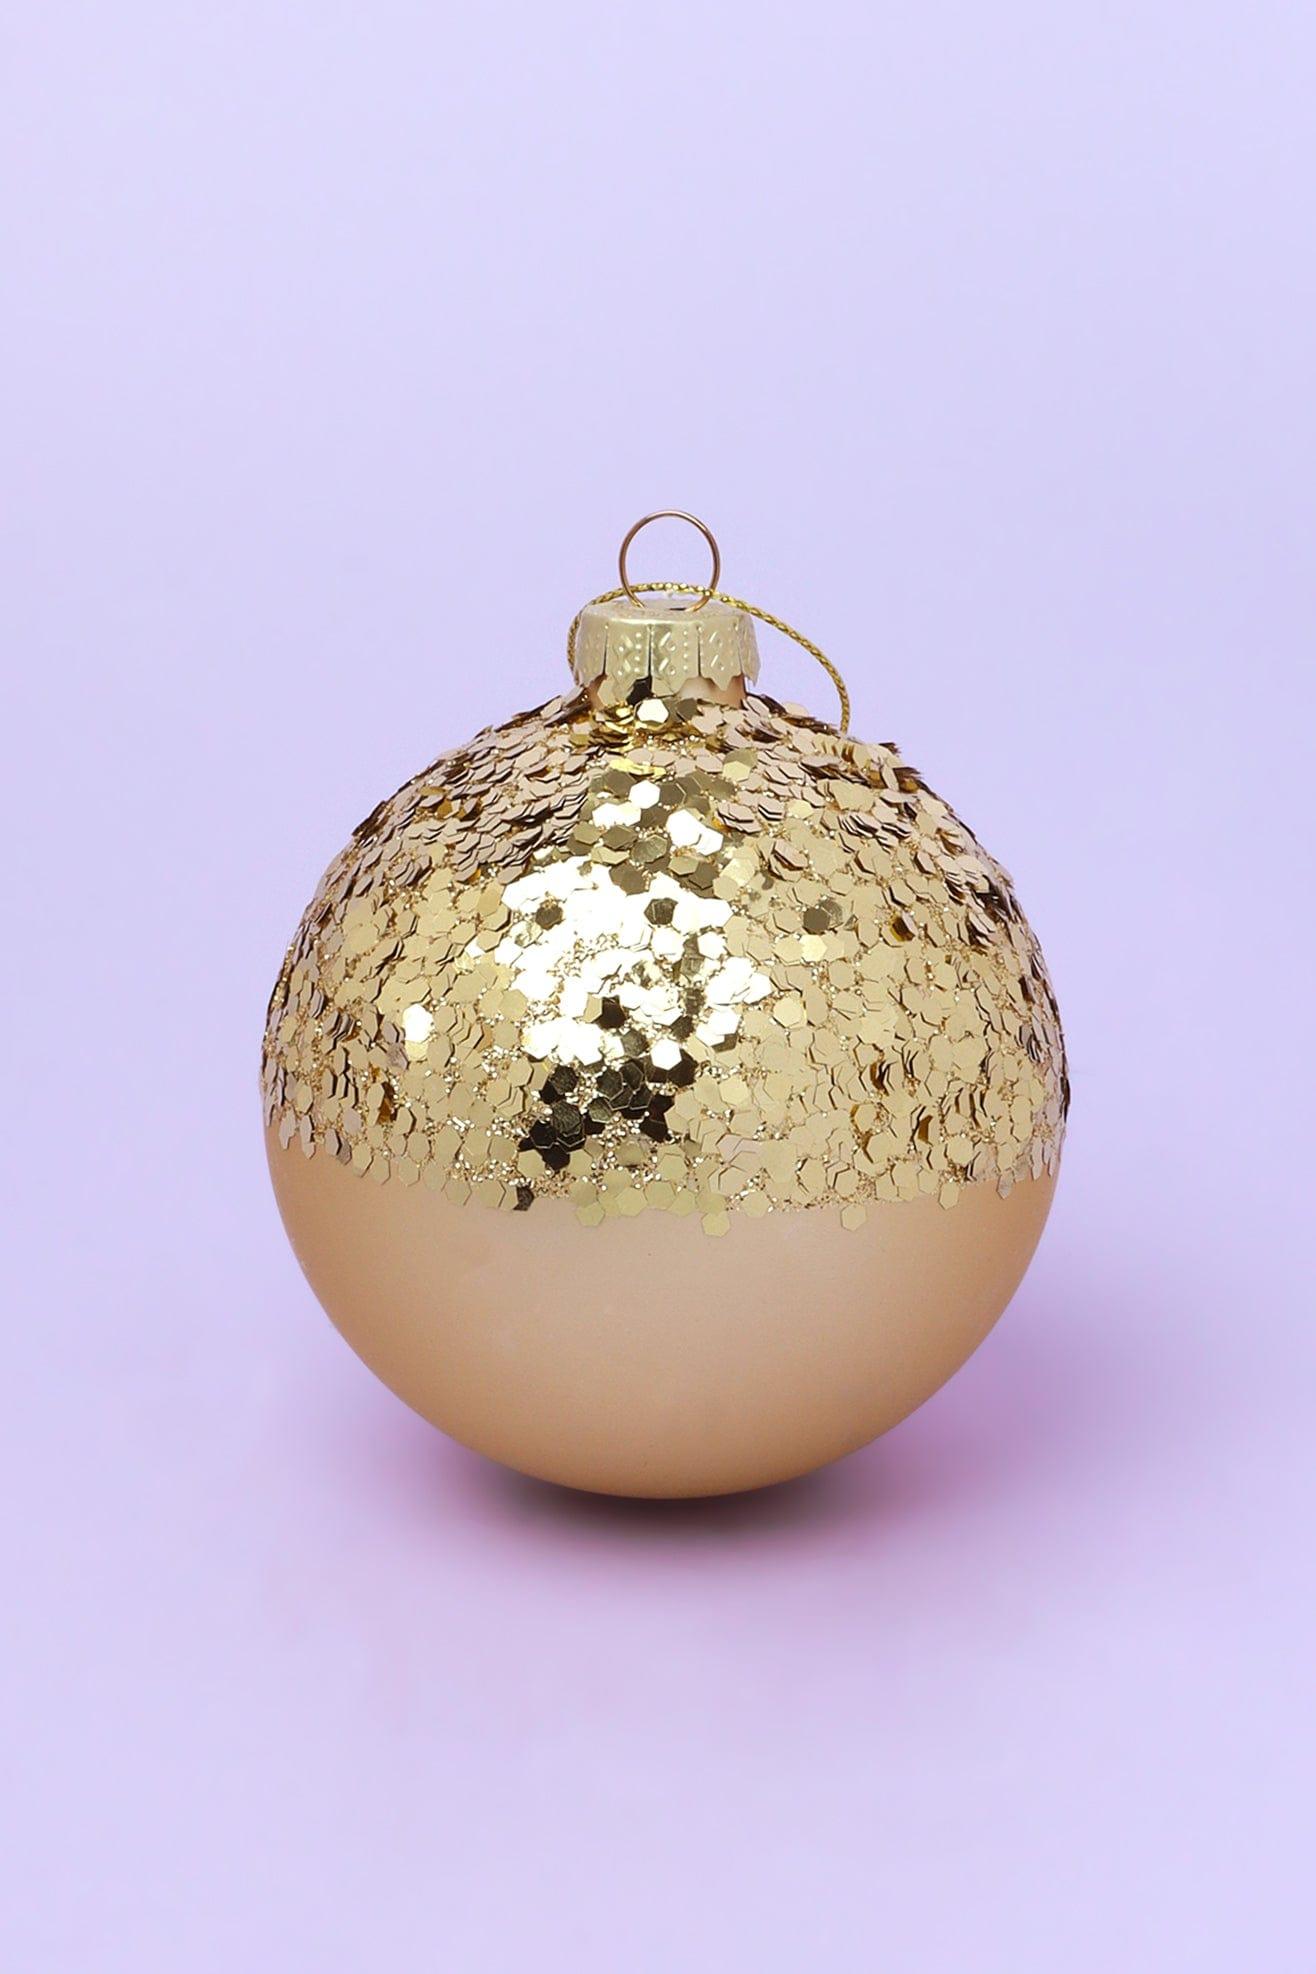 G Decor Christmas Decorations Gold / Sequins Elegant Gold Christmas Baubles - Clear Spun Glass and Sequin-Adorned Gold